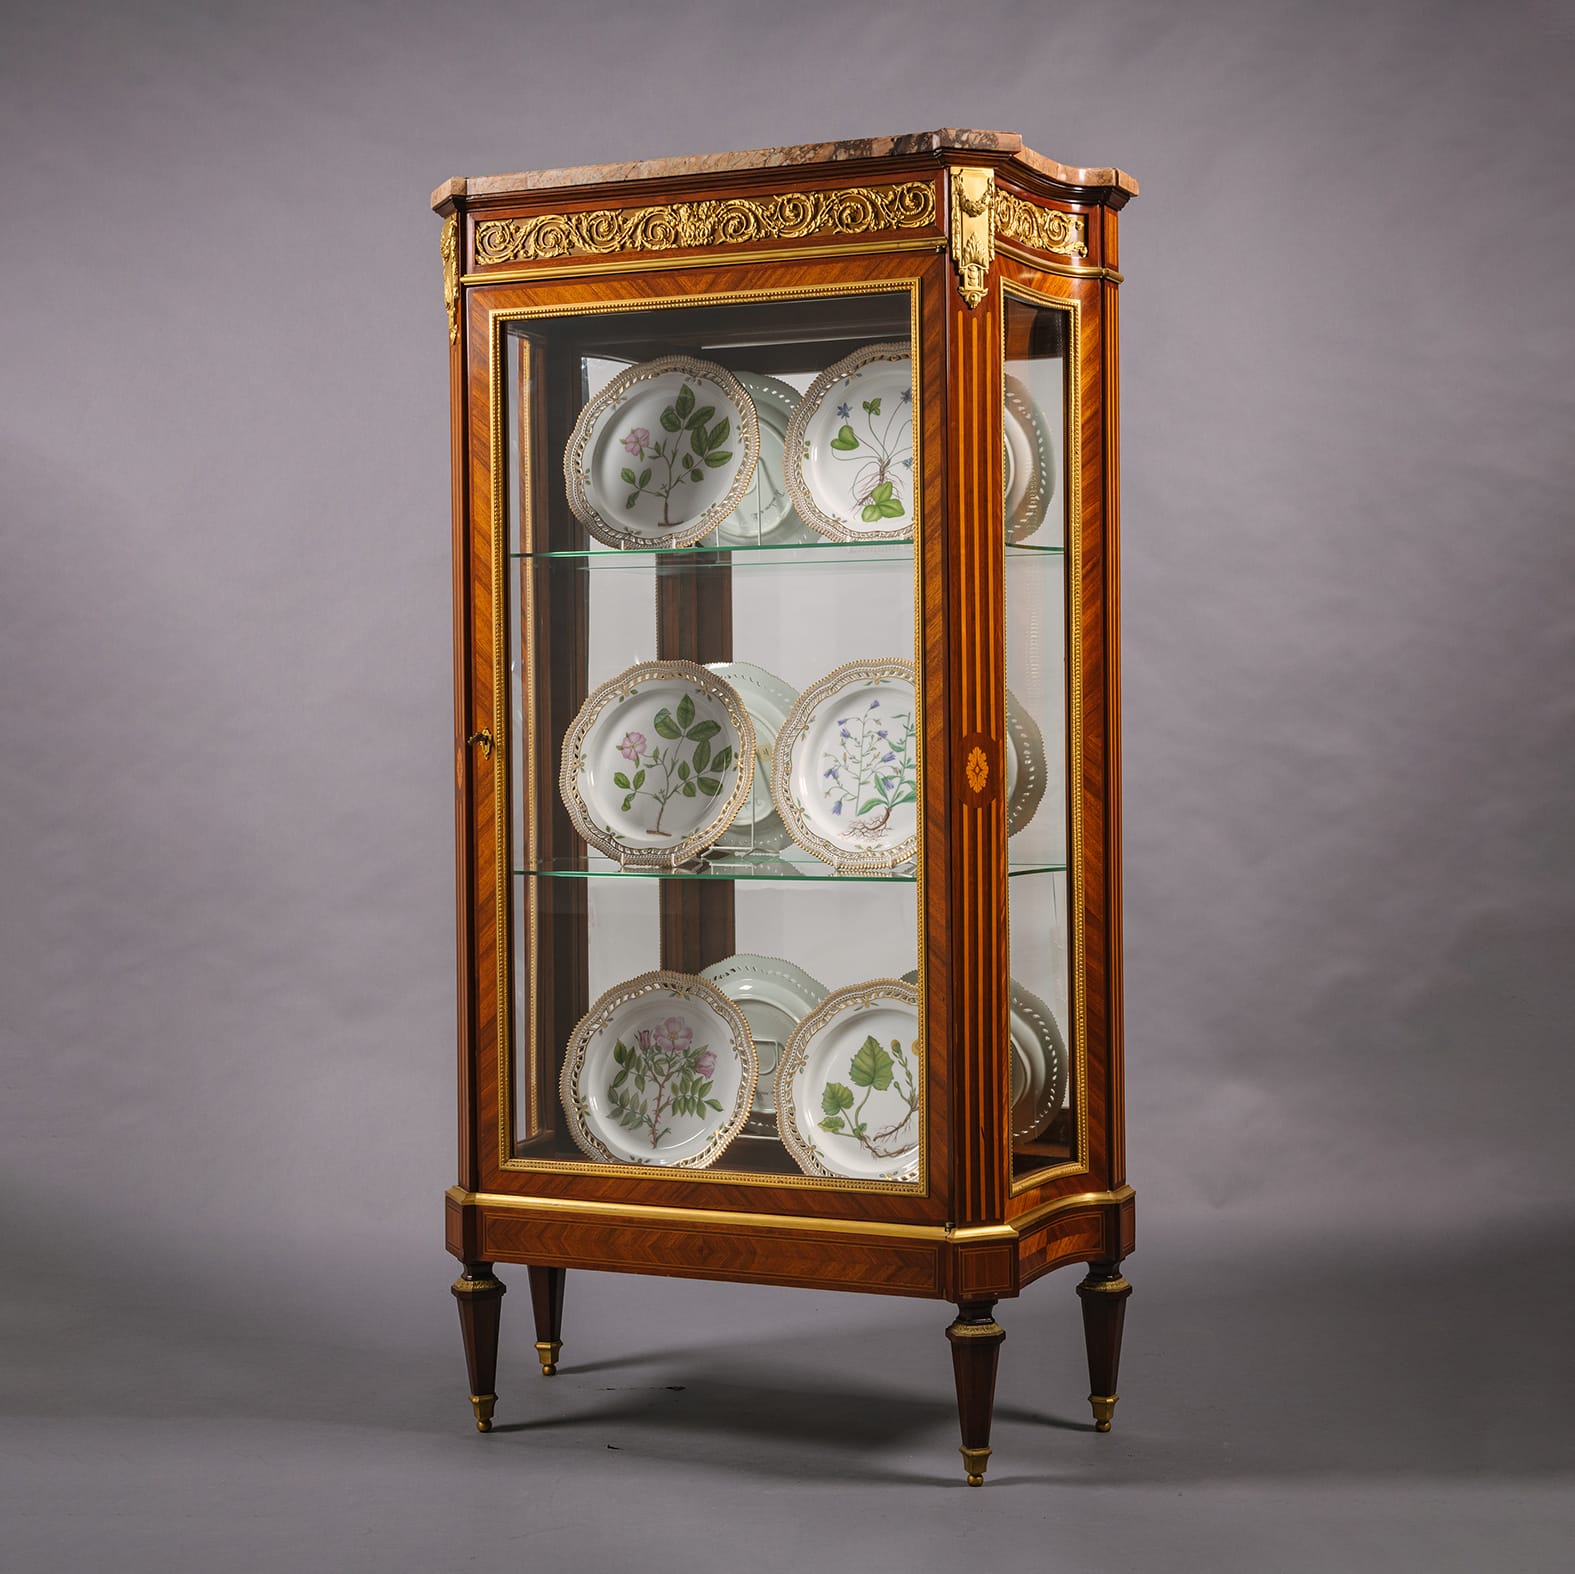 Grand Louis XVI Mahogany Cabinet with Bronze d'Ore Mounts, French